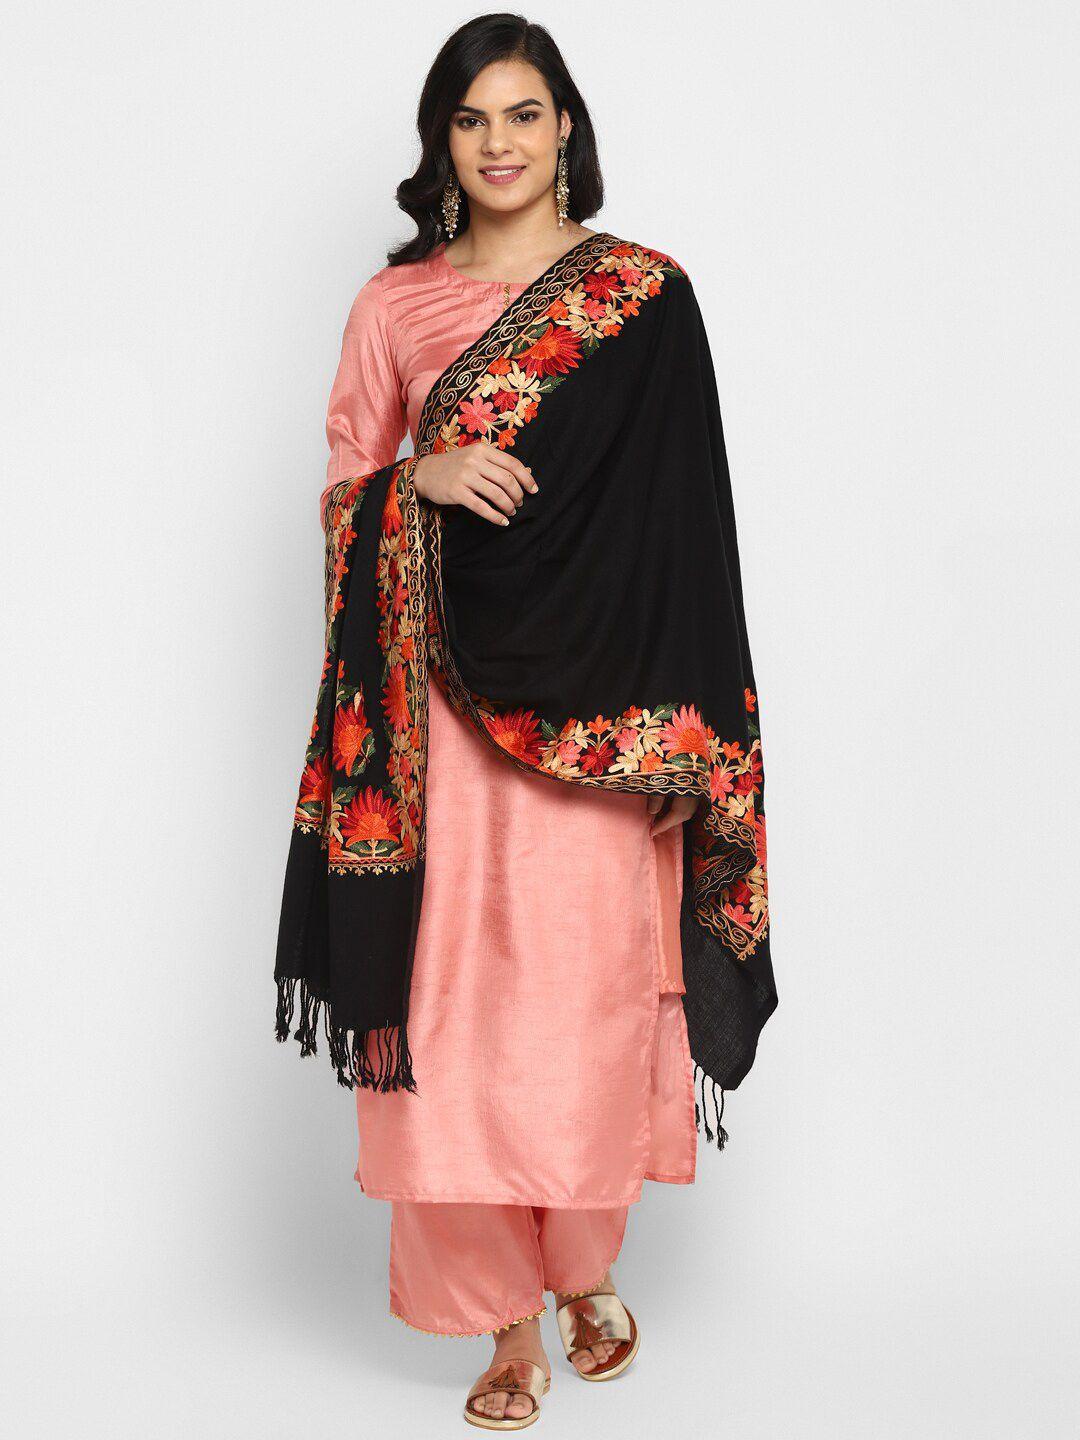 zamour women black & red kashmiri embroidered stole